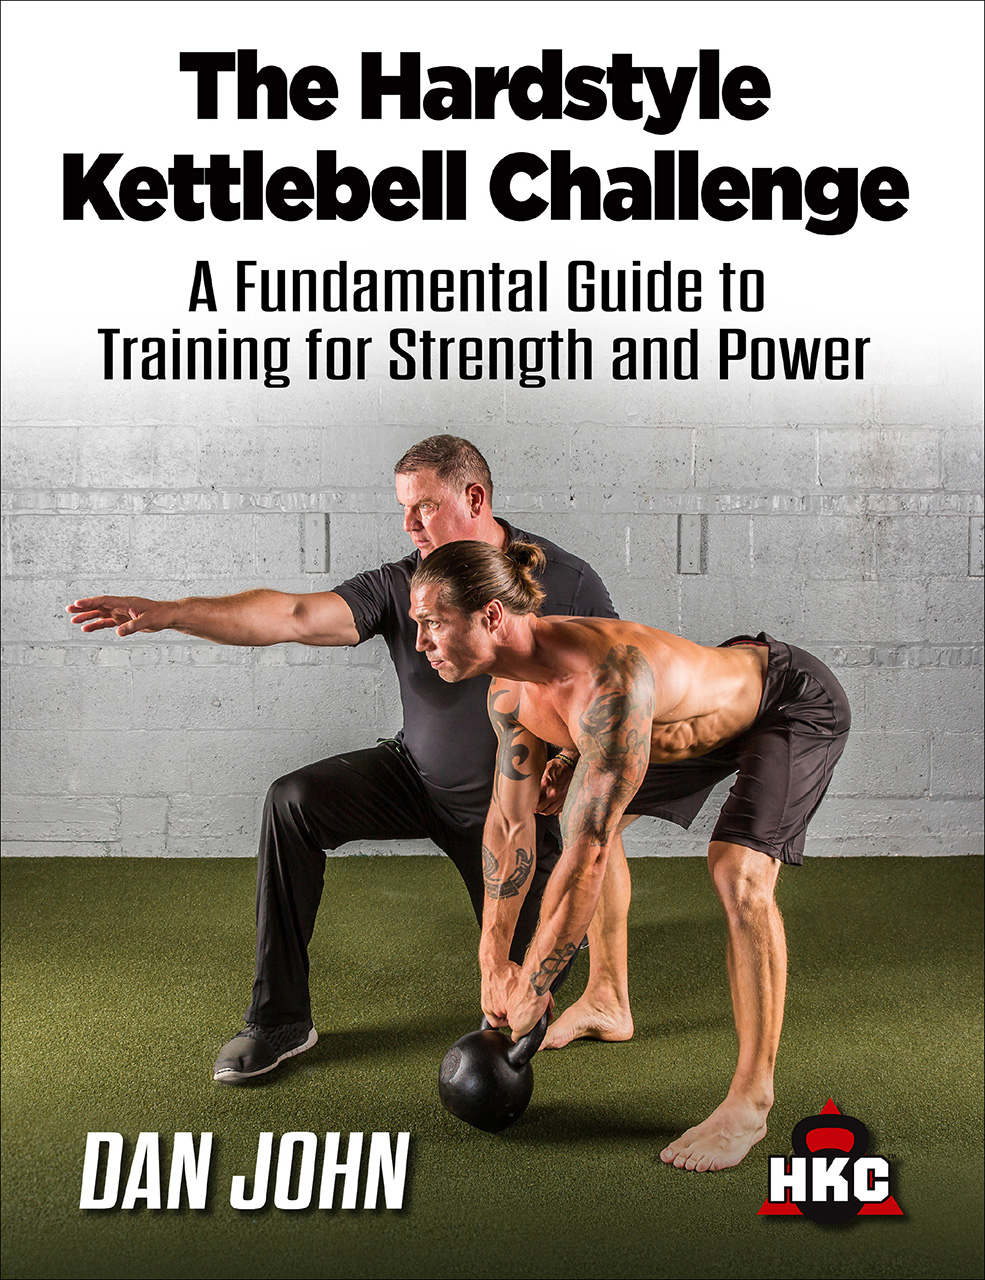 This image is the cover for the book The Hardstyle Kettlebell Challenge